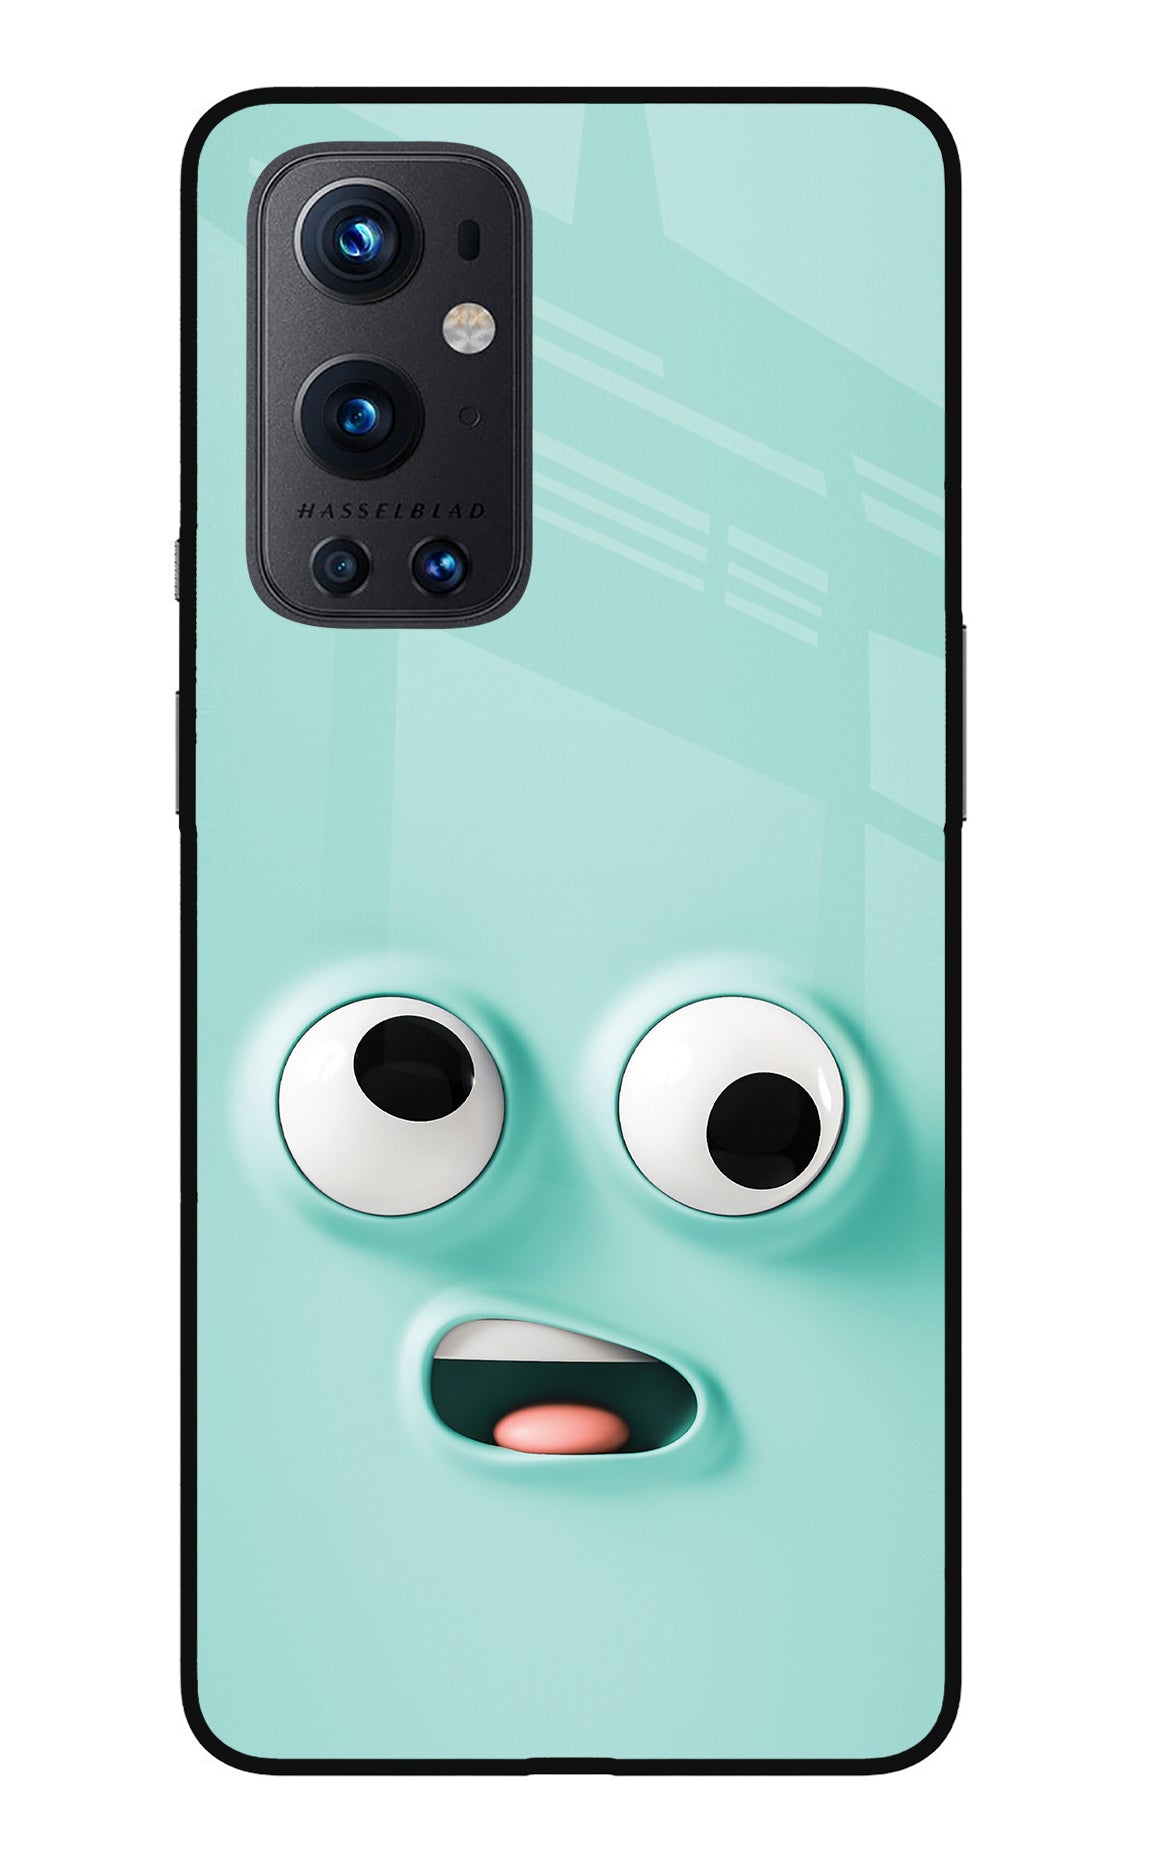 Funny Cartoon Oneplus 9 Pro Back Cover